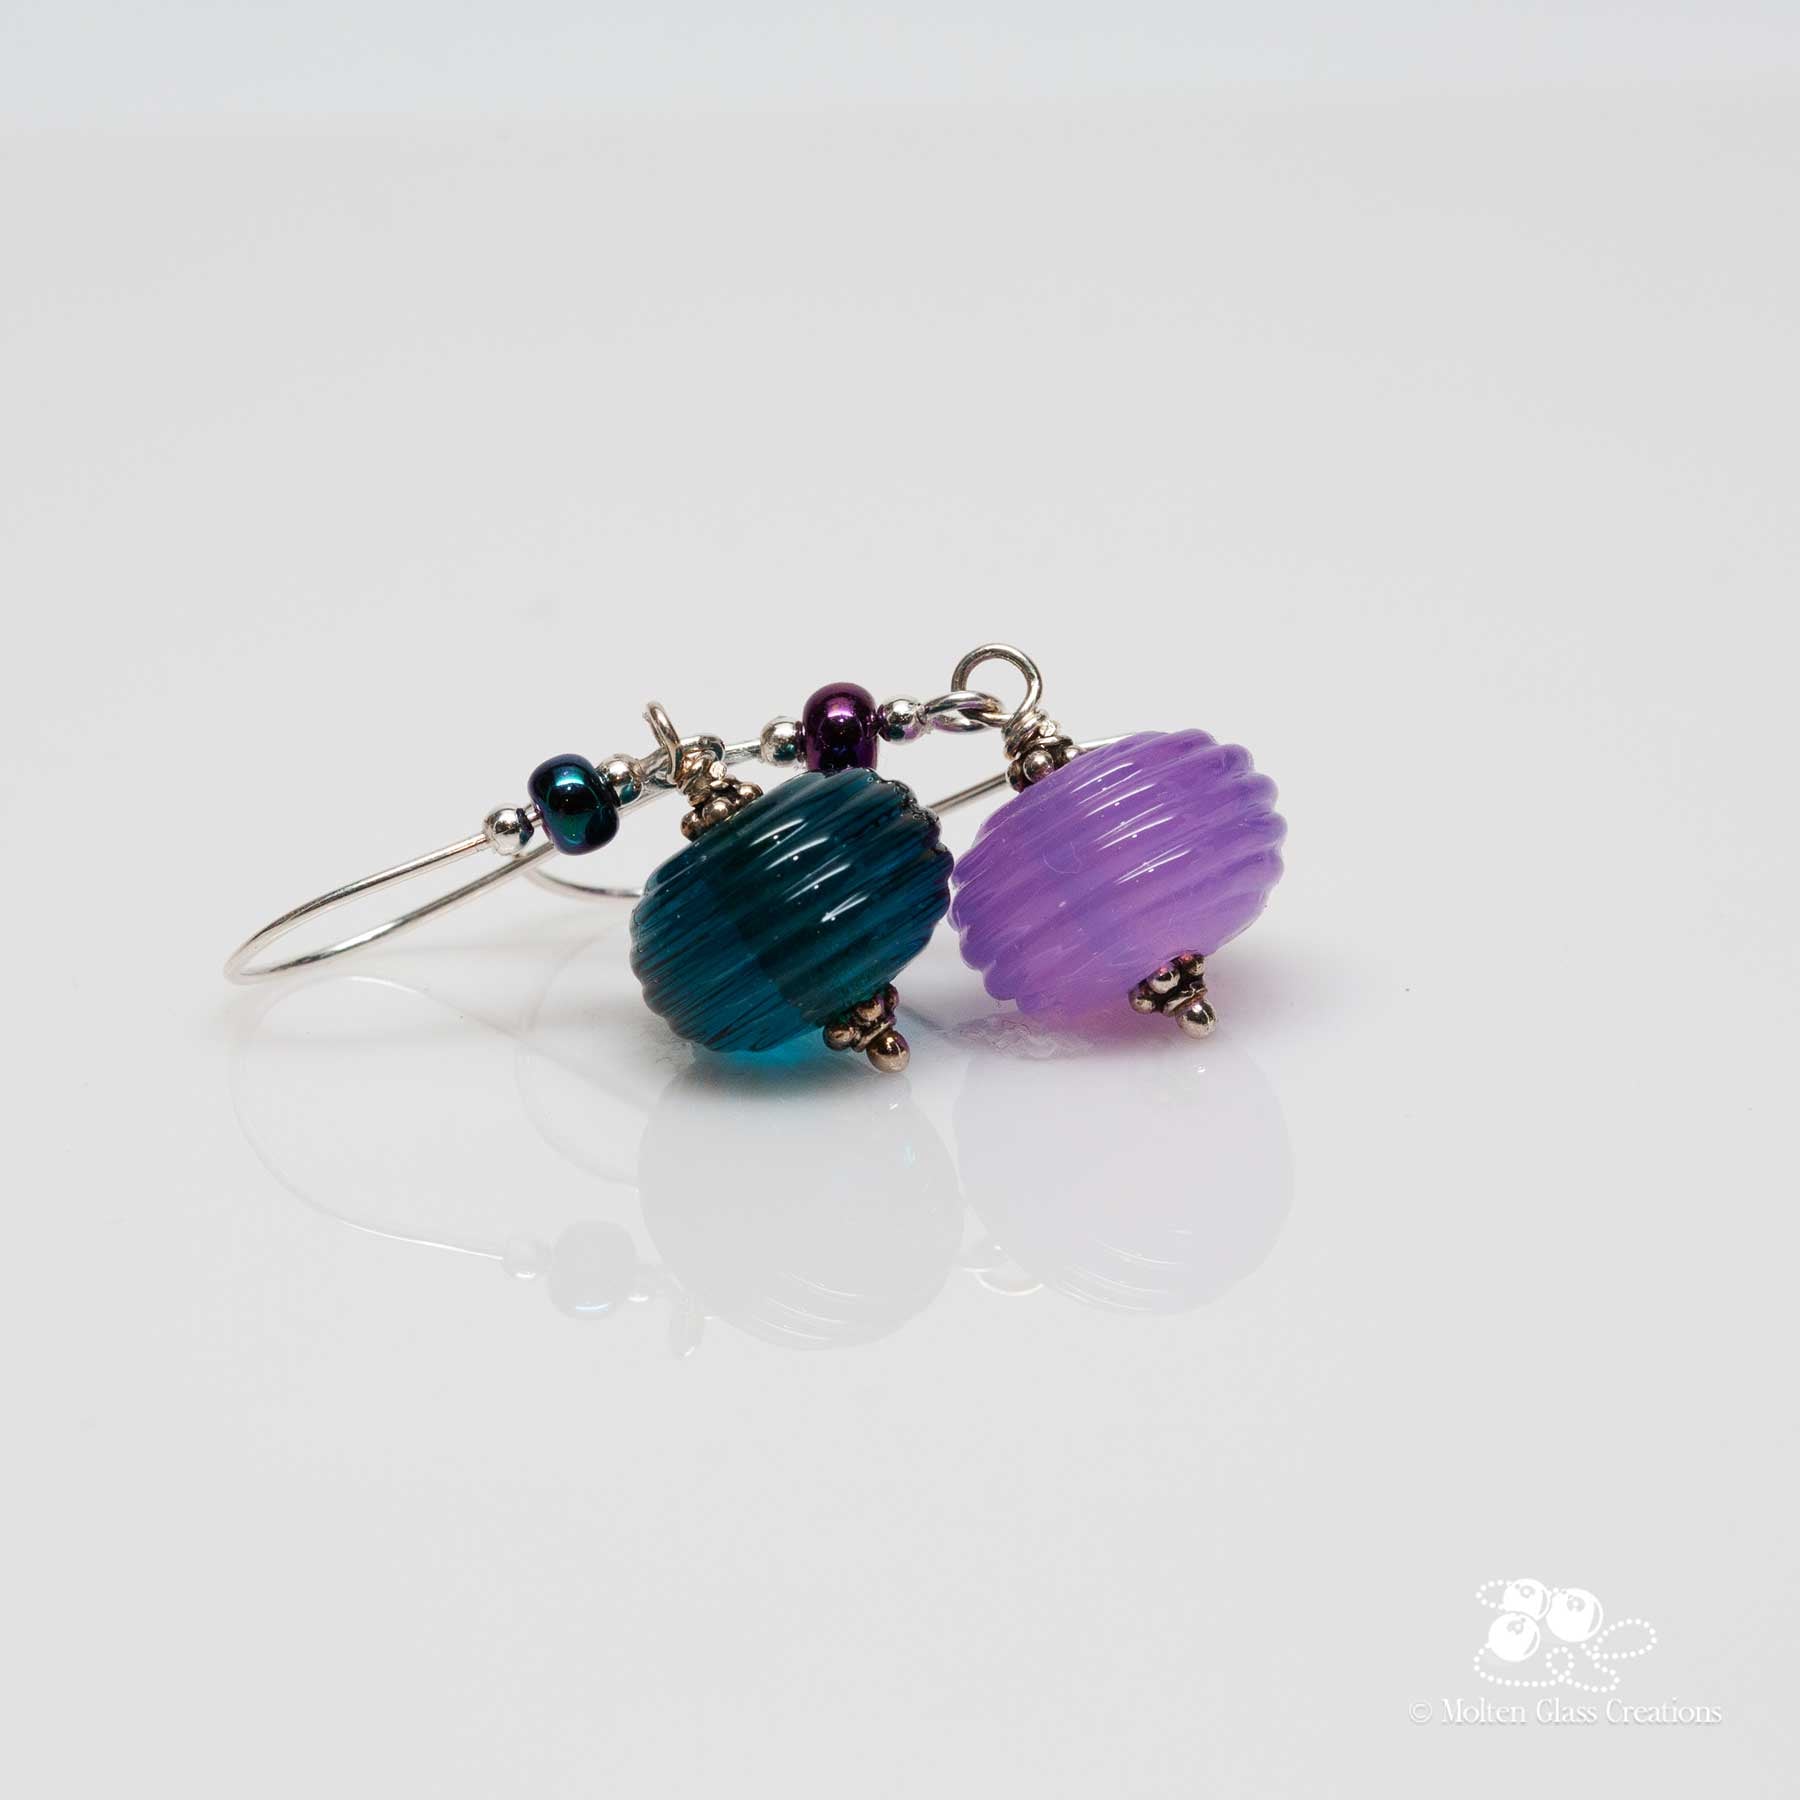 Mismatched Teal & Lavender Earrings - Molten Glass Creations